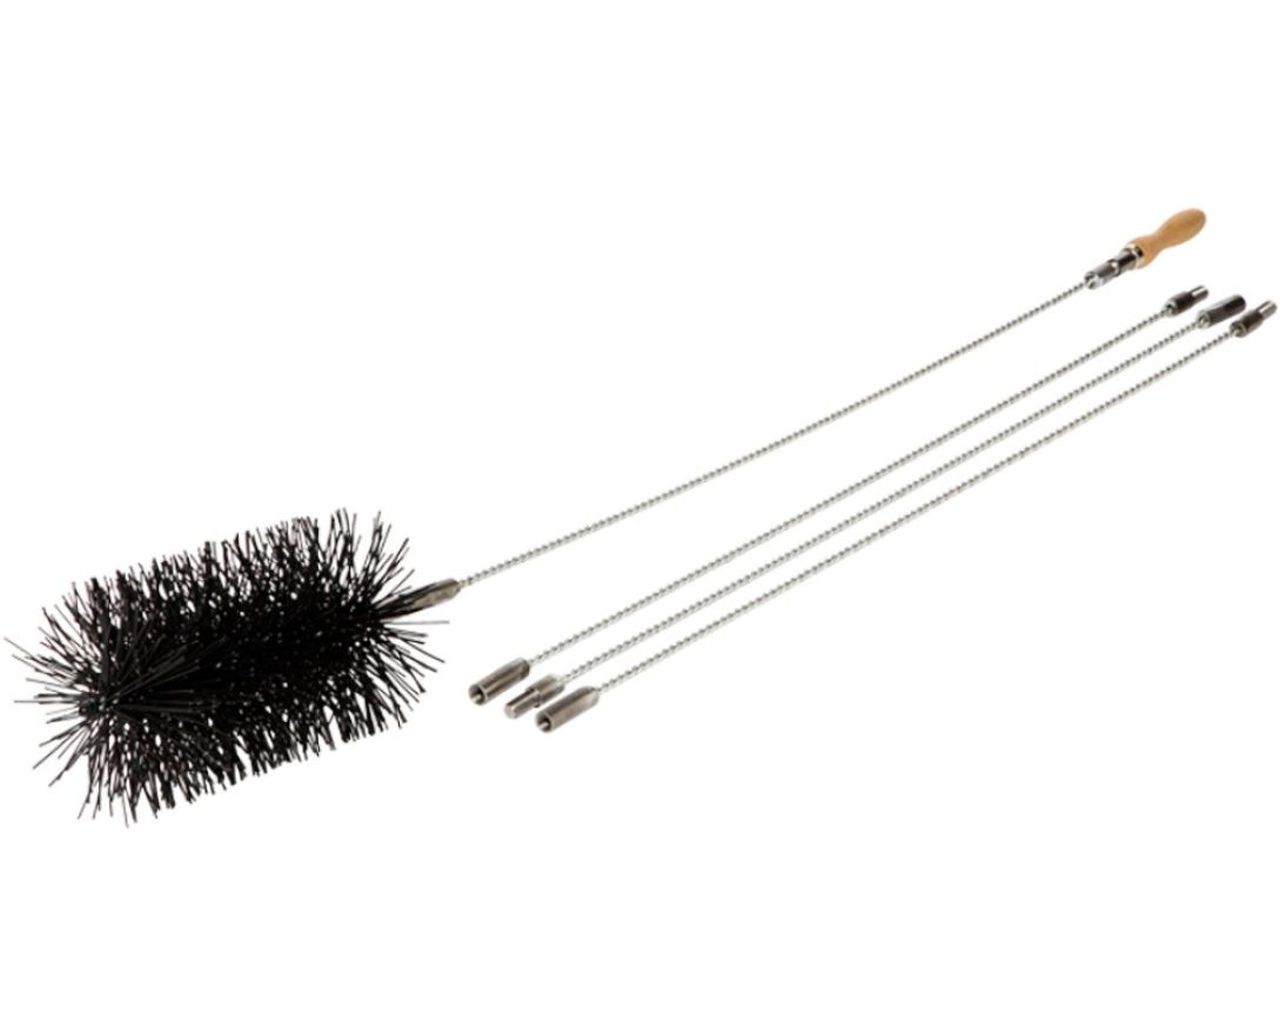 Fire Brush Cleaning Kit with Extensions, , hi-res image number null